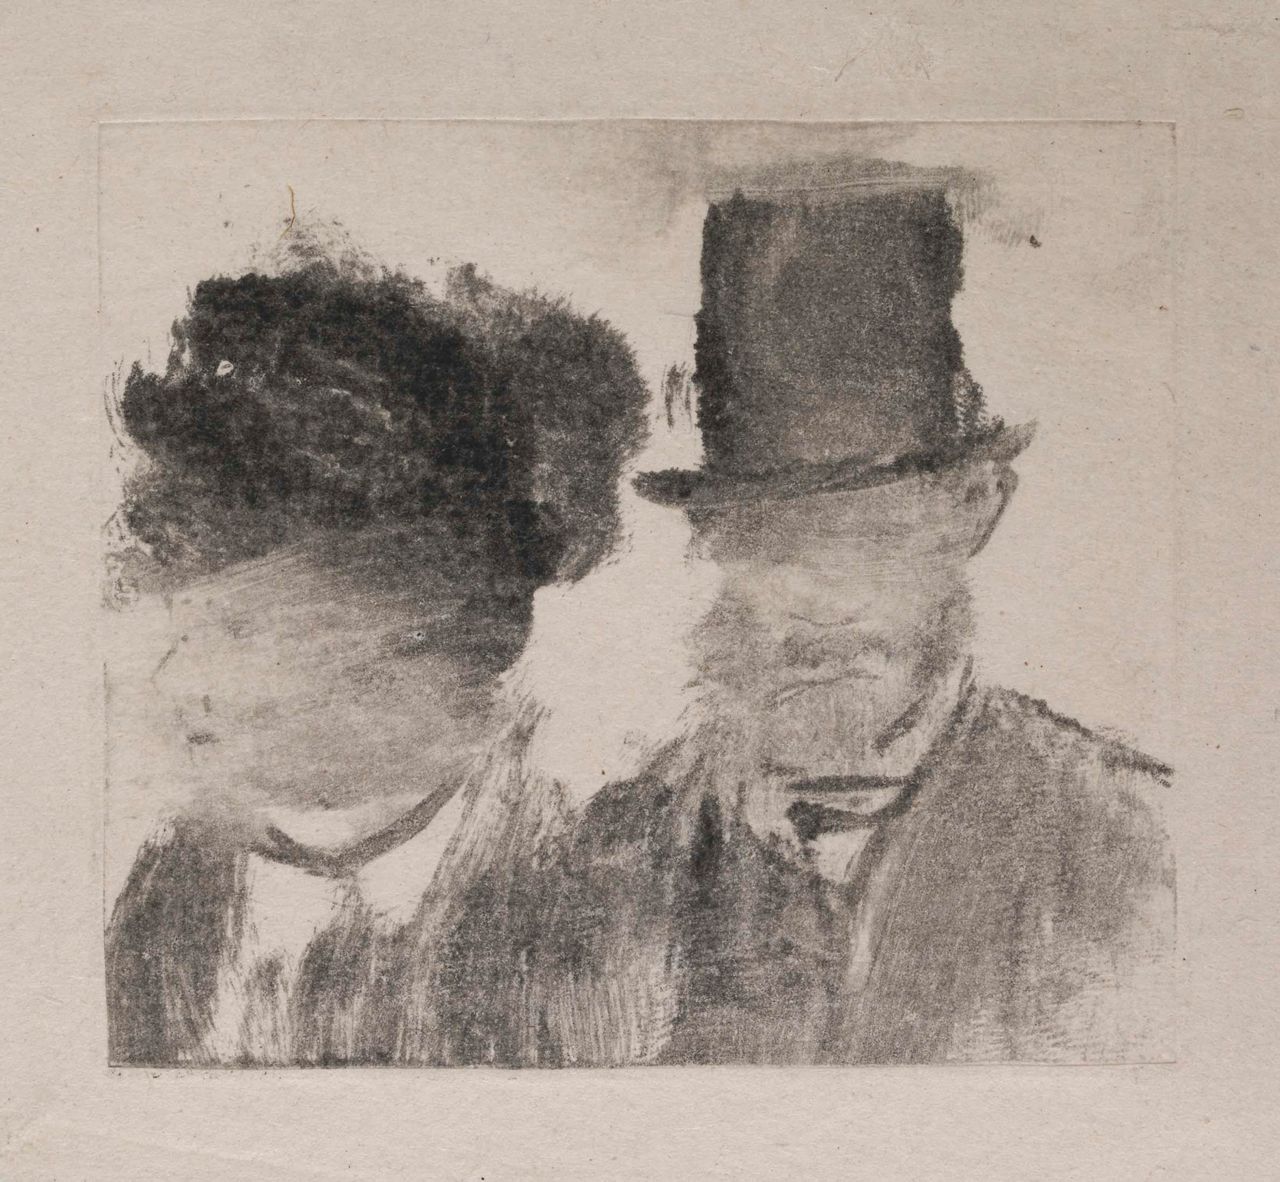 Edgar Degas (French, 1834–1917). Heads of a Man and a Woman (Homme et femme, en buste), c. 1877–80. Monotype on paper. Plate: 2 13/16 x 3 3/16 in. (7.2 x 8.1 cm). British Museum, London. Bequeathed by Campbell Dodgson.